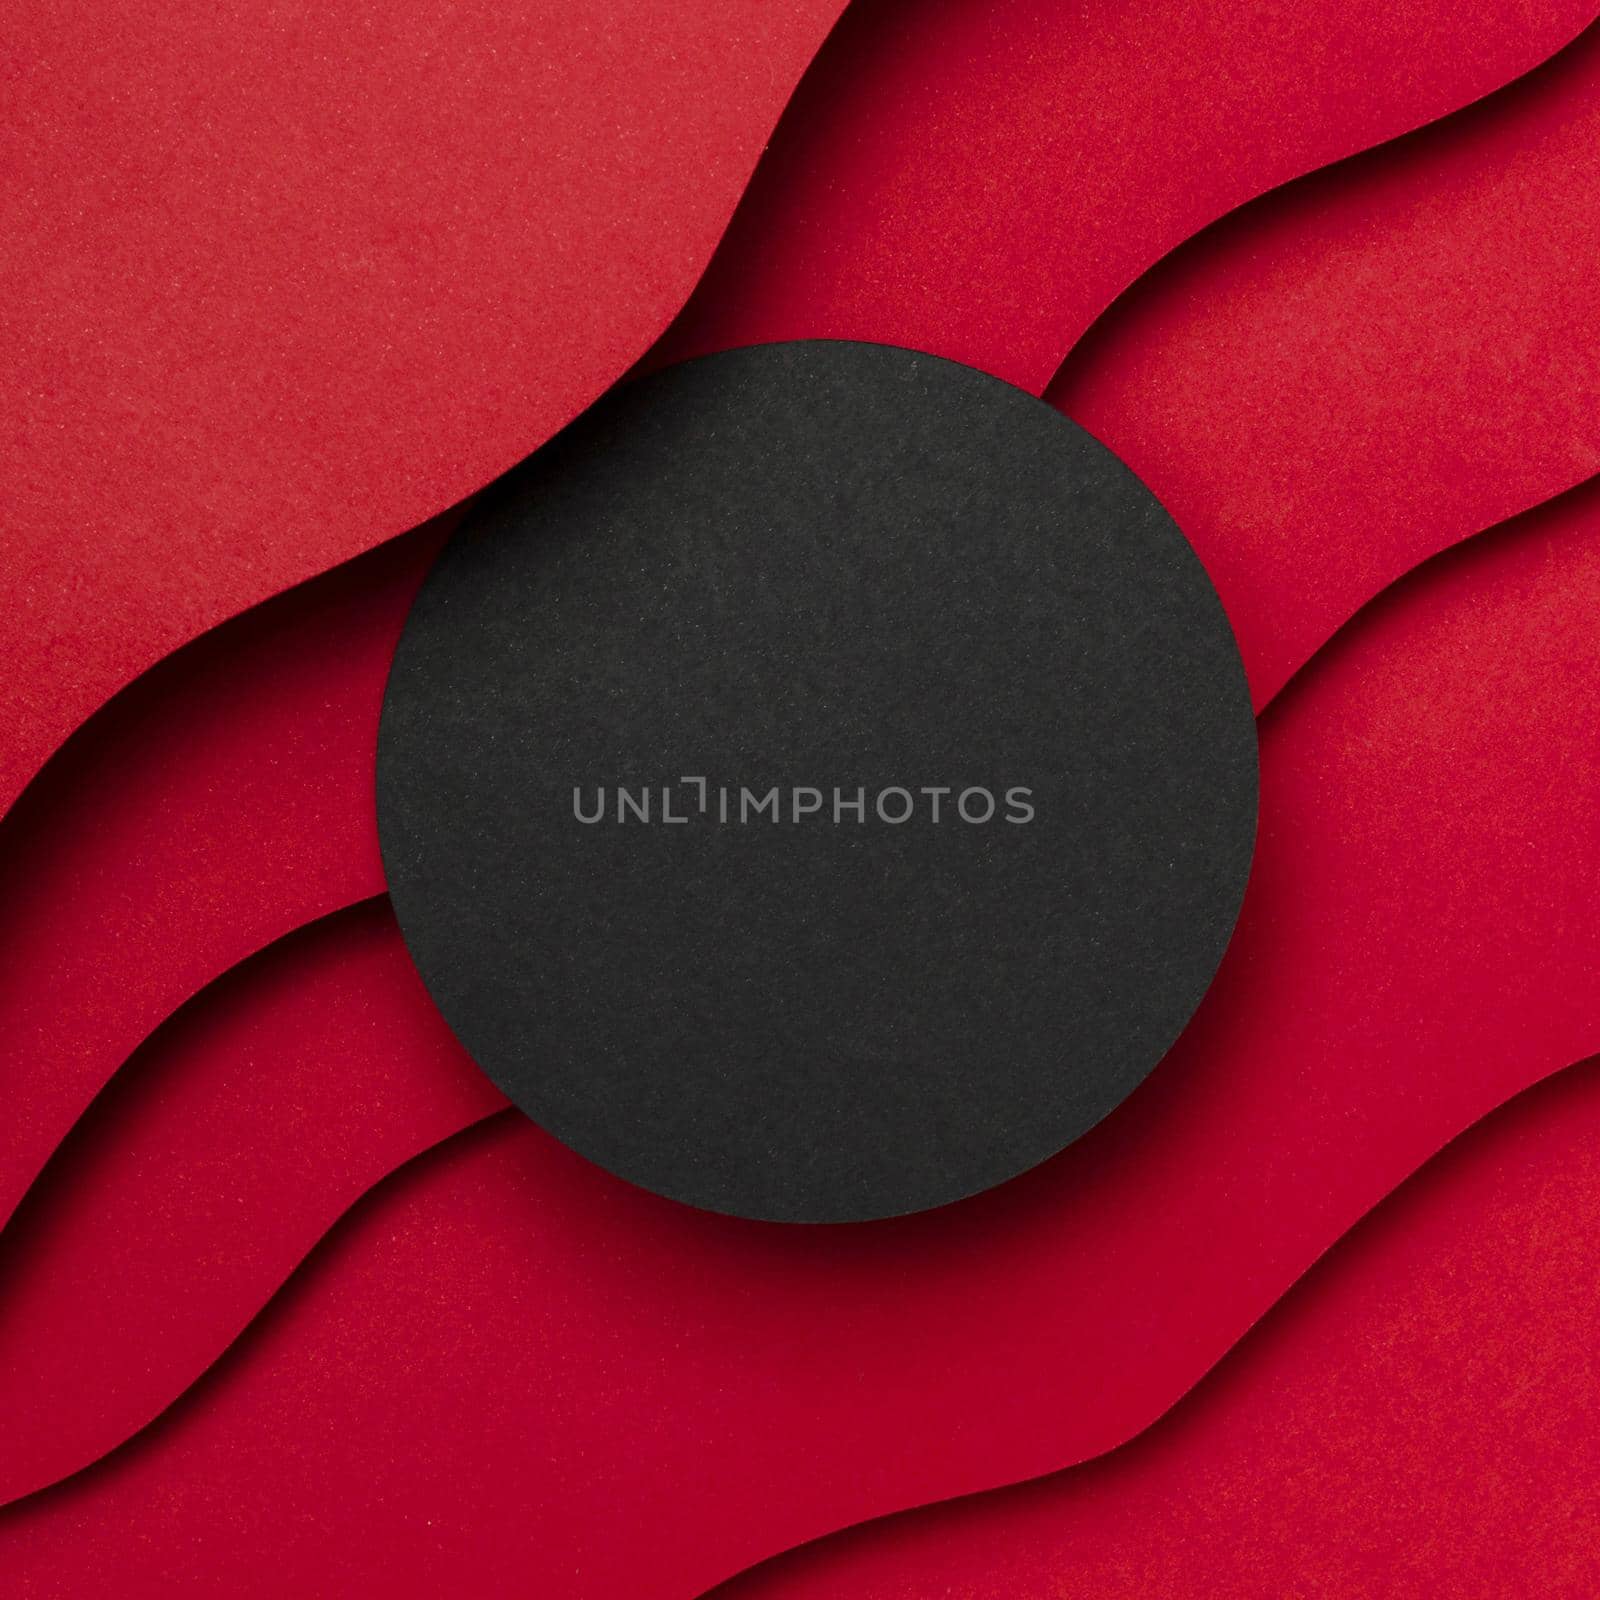 black empty circle wavy layers red background. High quality beautiful photo concept by Zahard